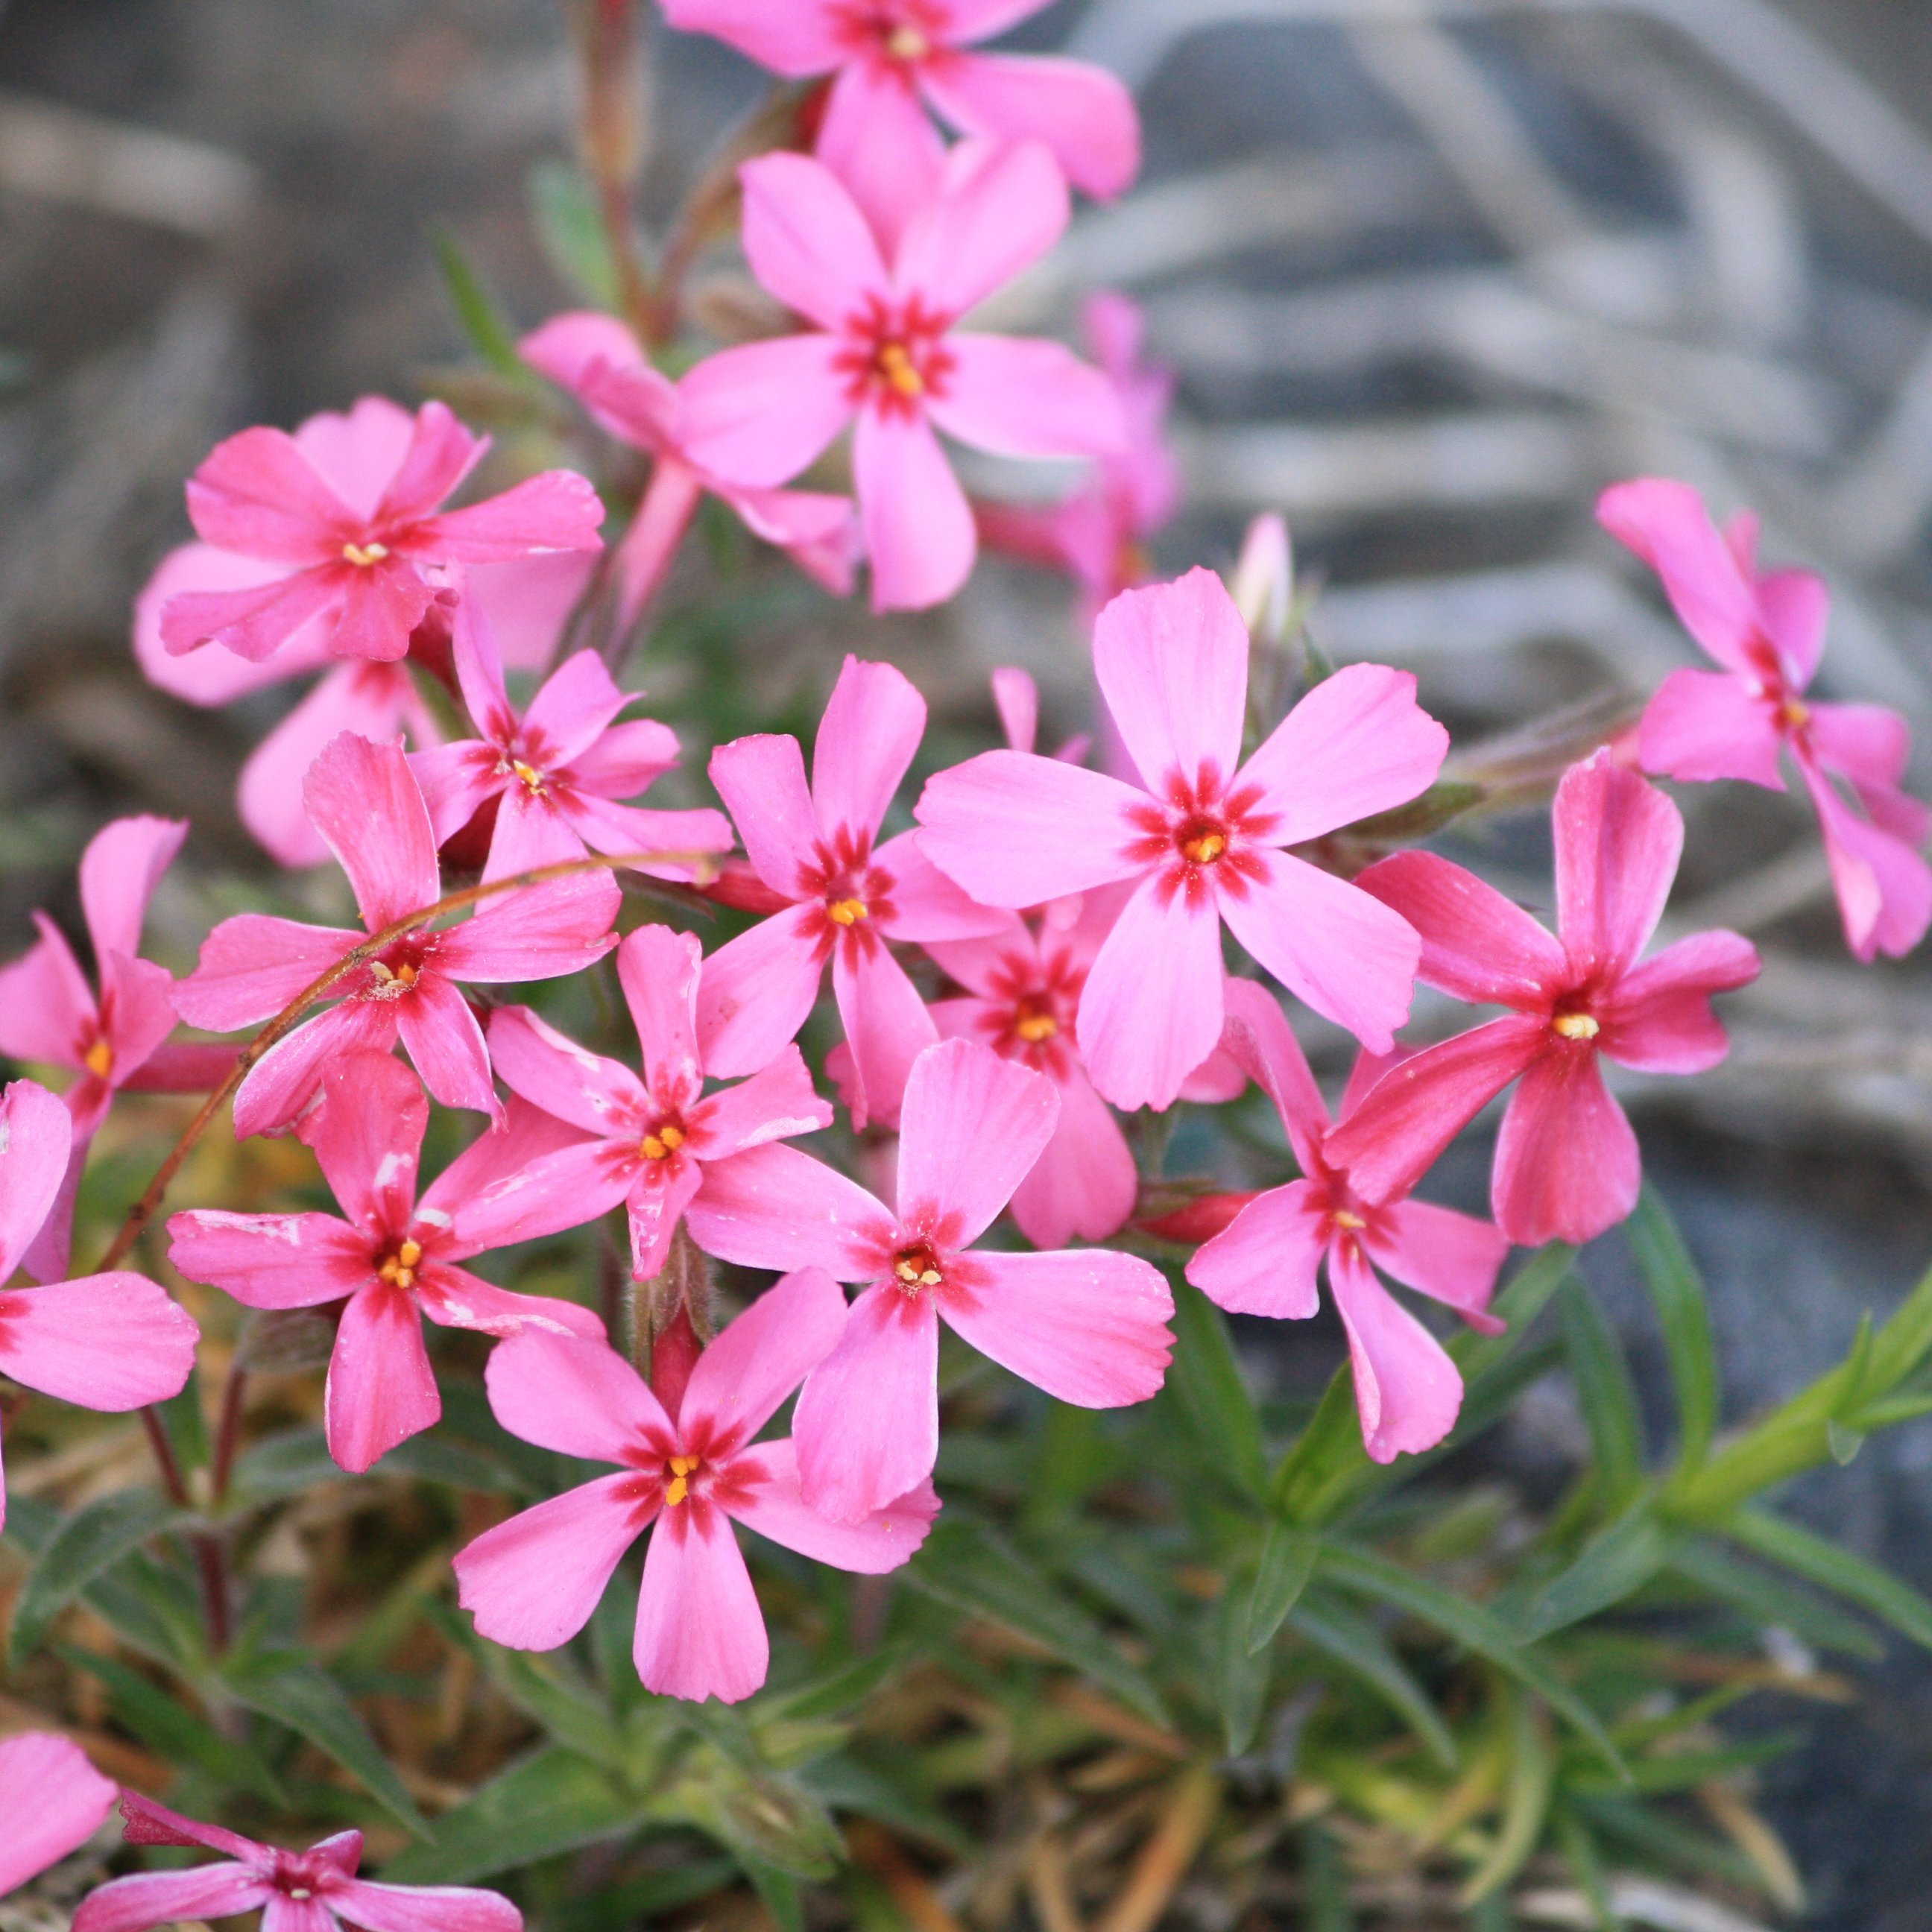 Creeping Phlox Pink Flowers Picture | Free Photograph | Photos ...